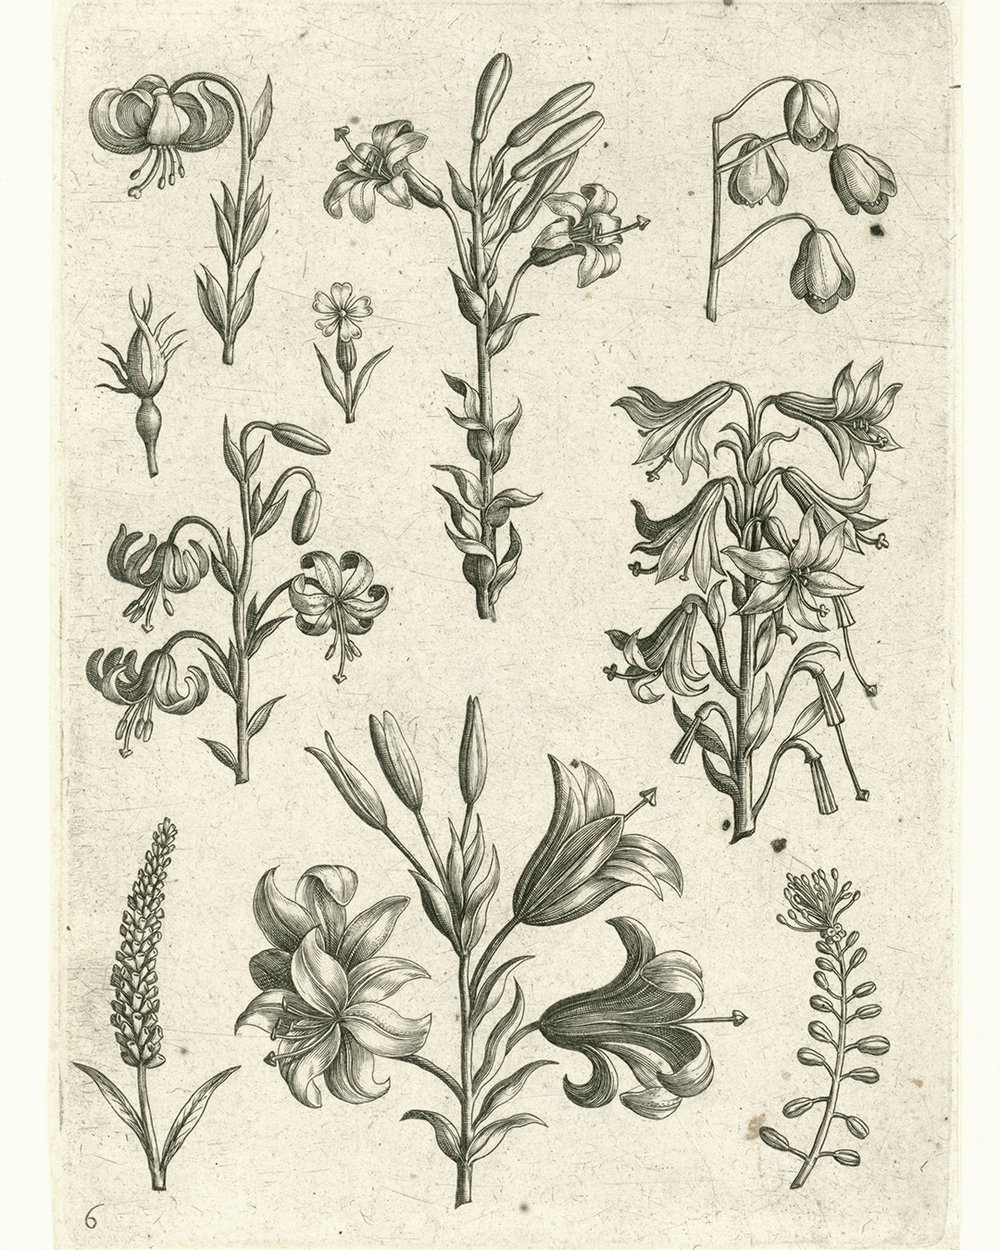 ''Four large lilies and some smaller flowers'' (1570 - 1618)